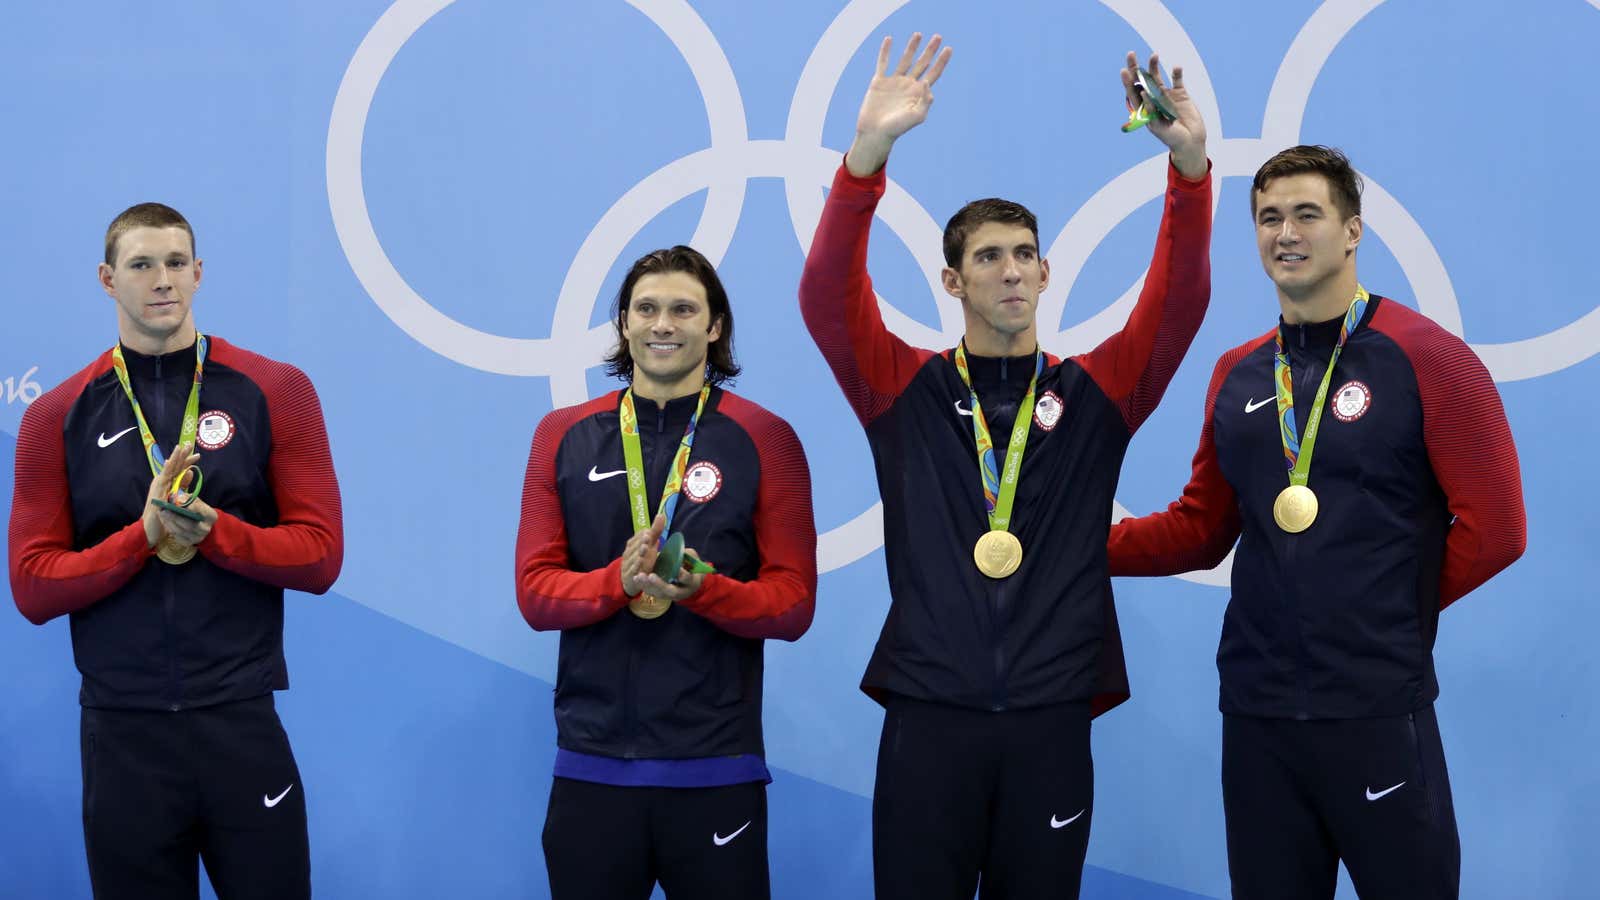 Michael Phelps in the offending sweat pants, part of the official Team USA uniform.